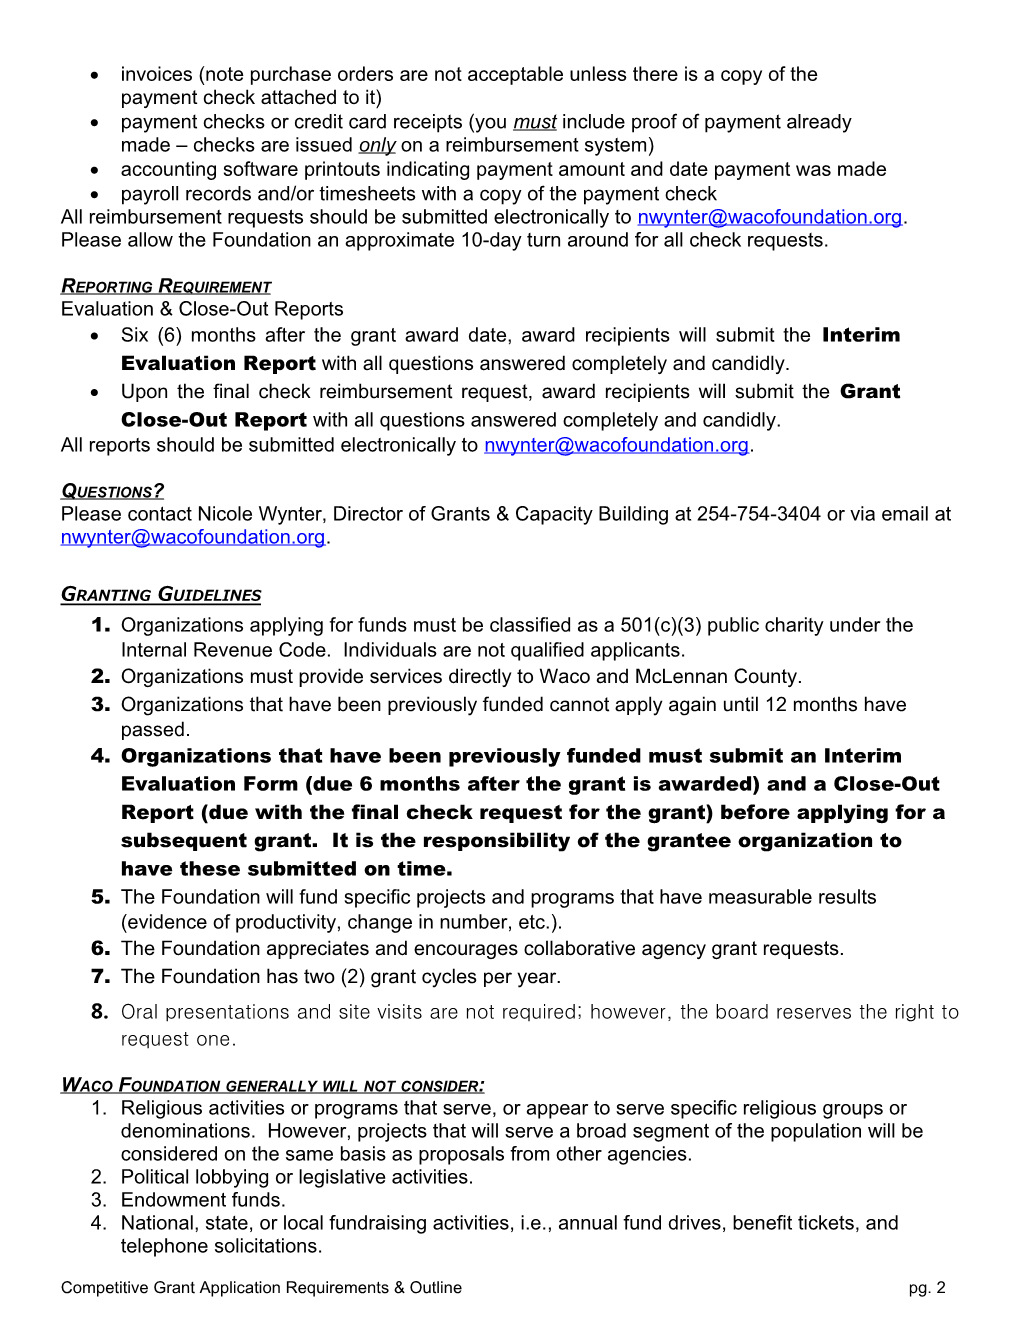 Competitive Grant Application Requirements